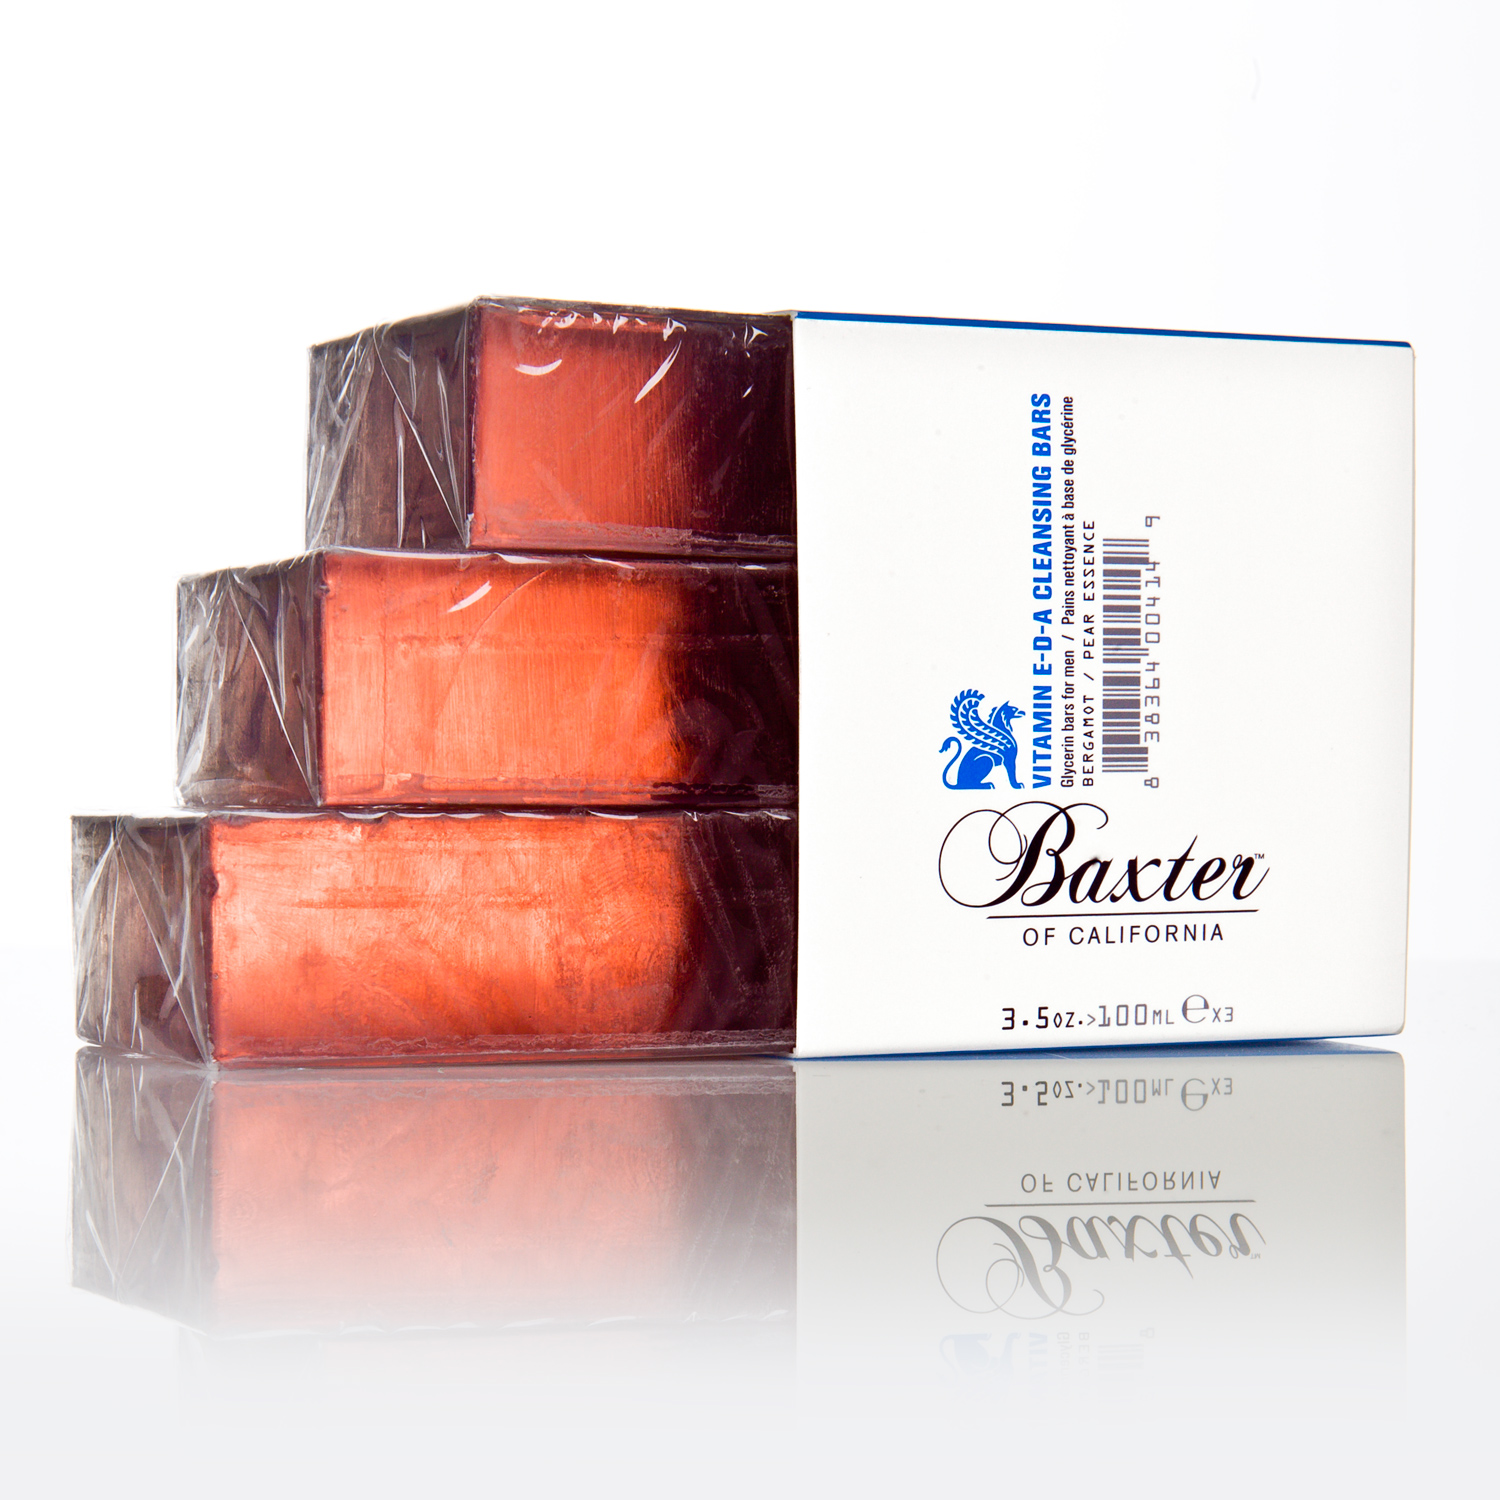 Baxter of California, Cleansing Bars